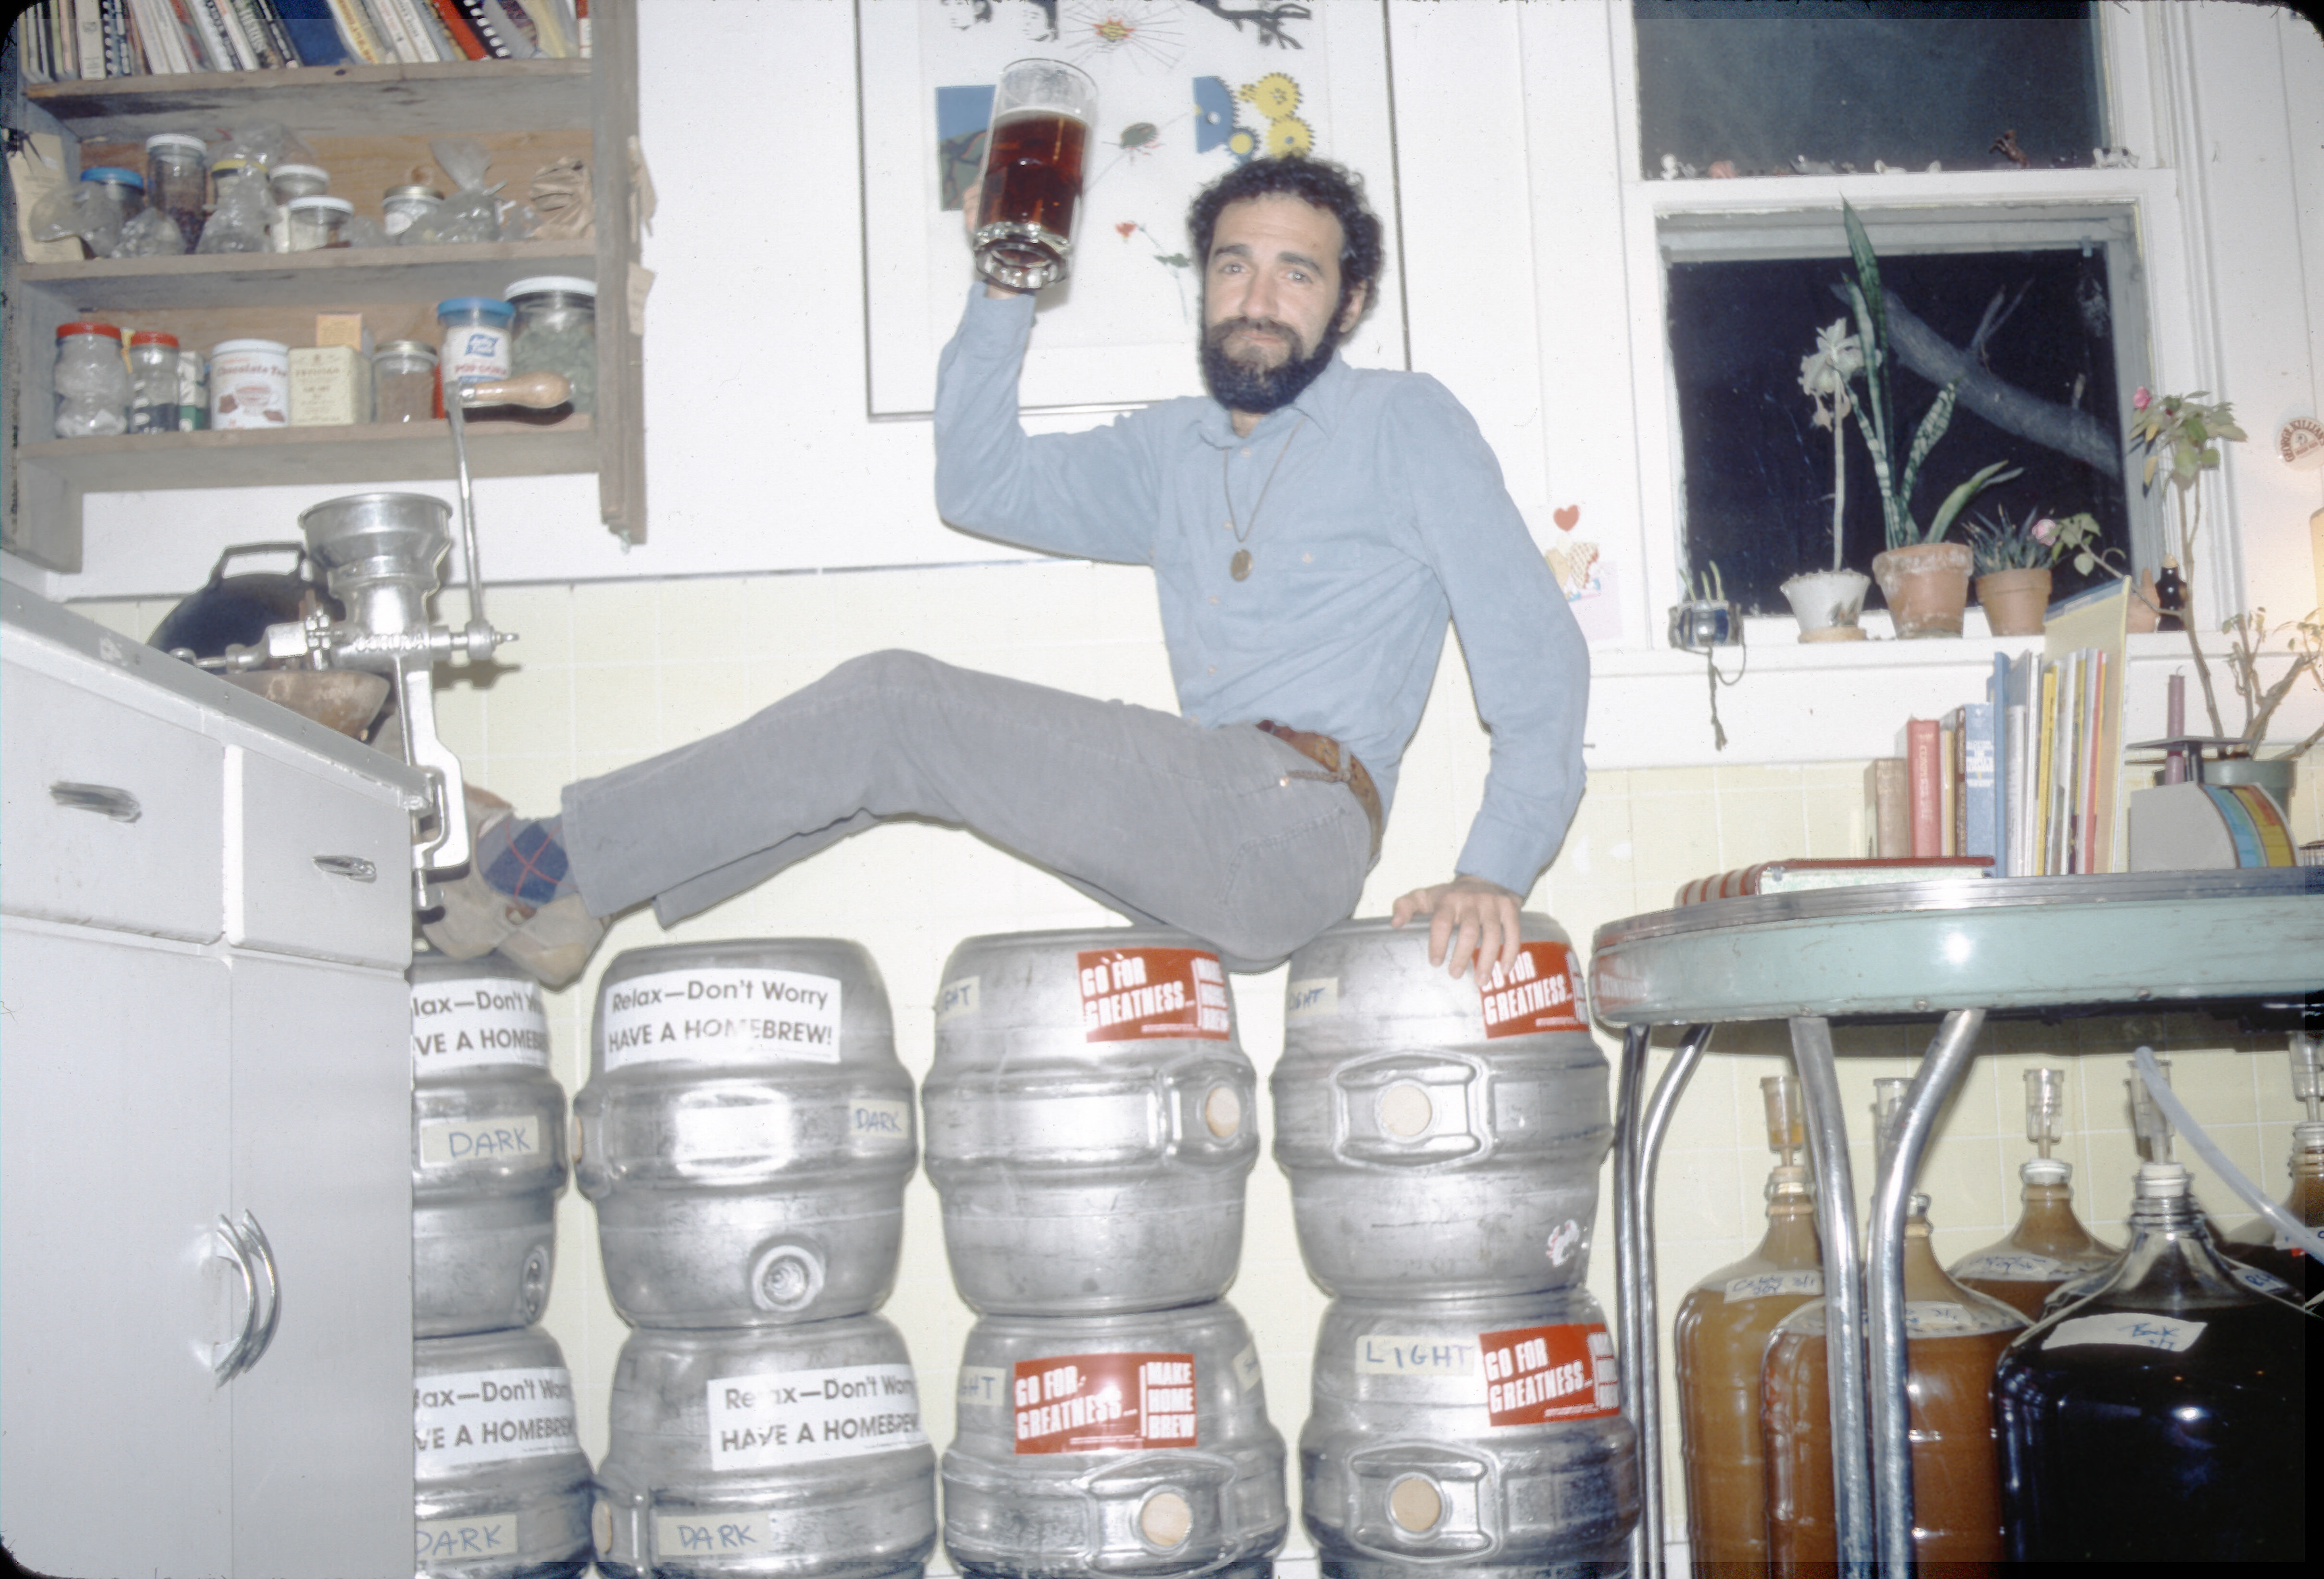 Charlie Papazian posing on a group of kegs. He holds a mug of beer, and jugs of brewing beer are visible underneath a nearby table.